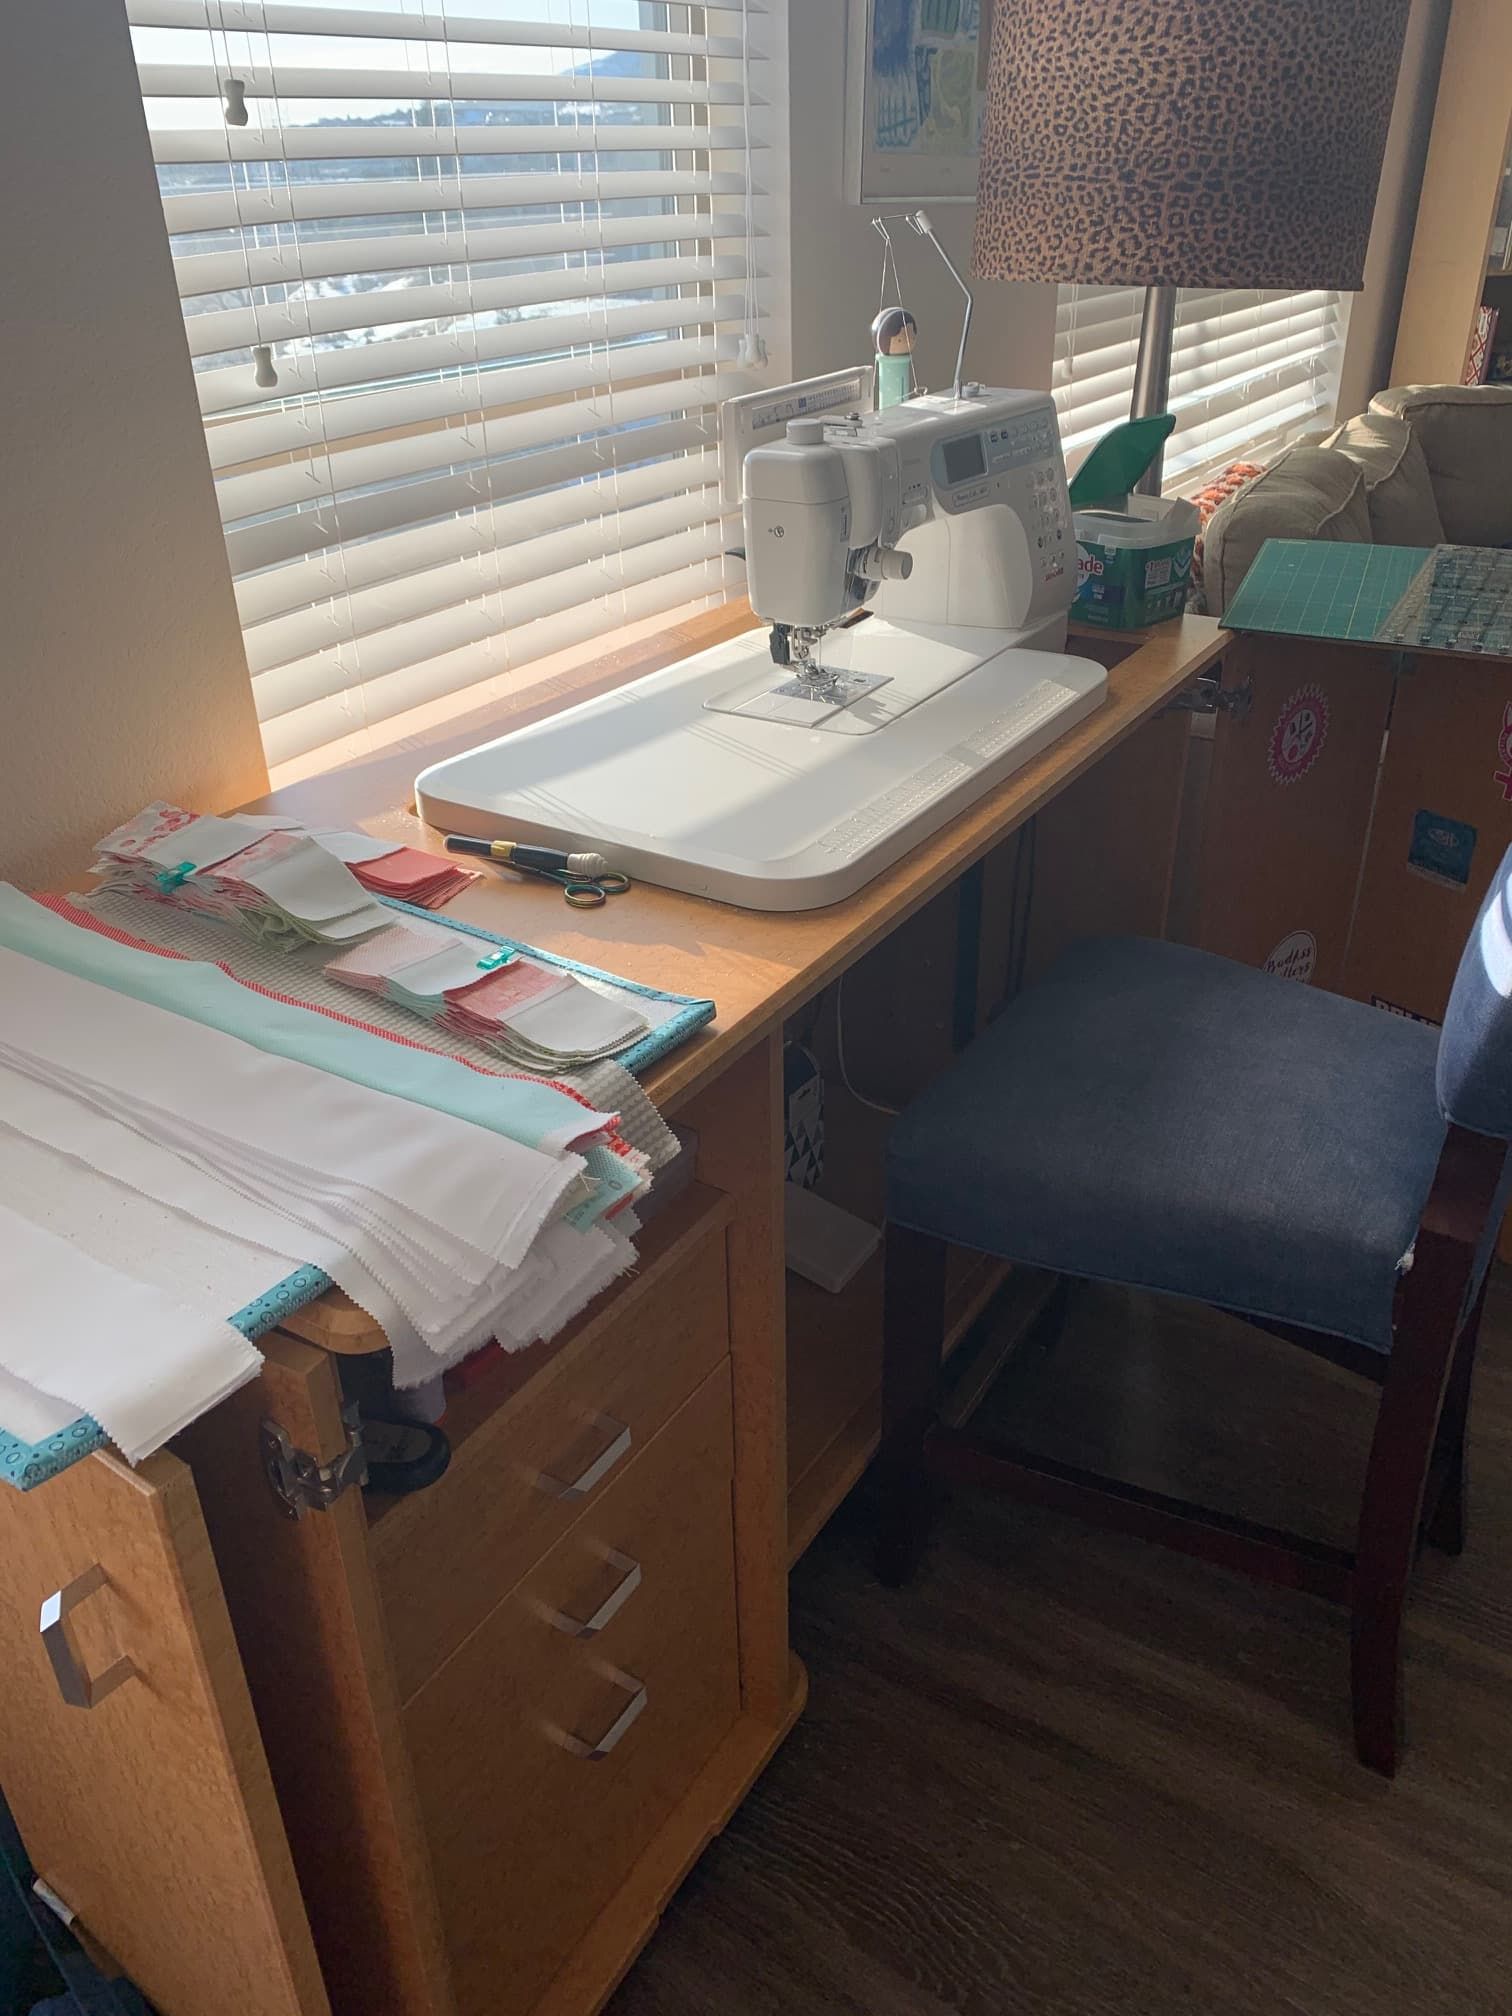 Bonus Sewcial Distancing Episode Podcast Quilting Daily 